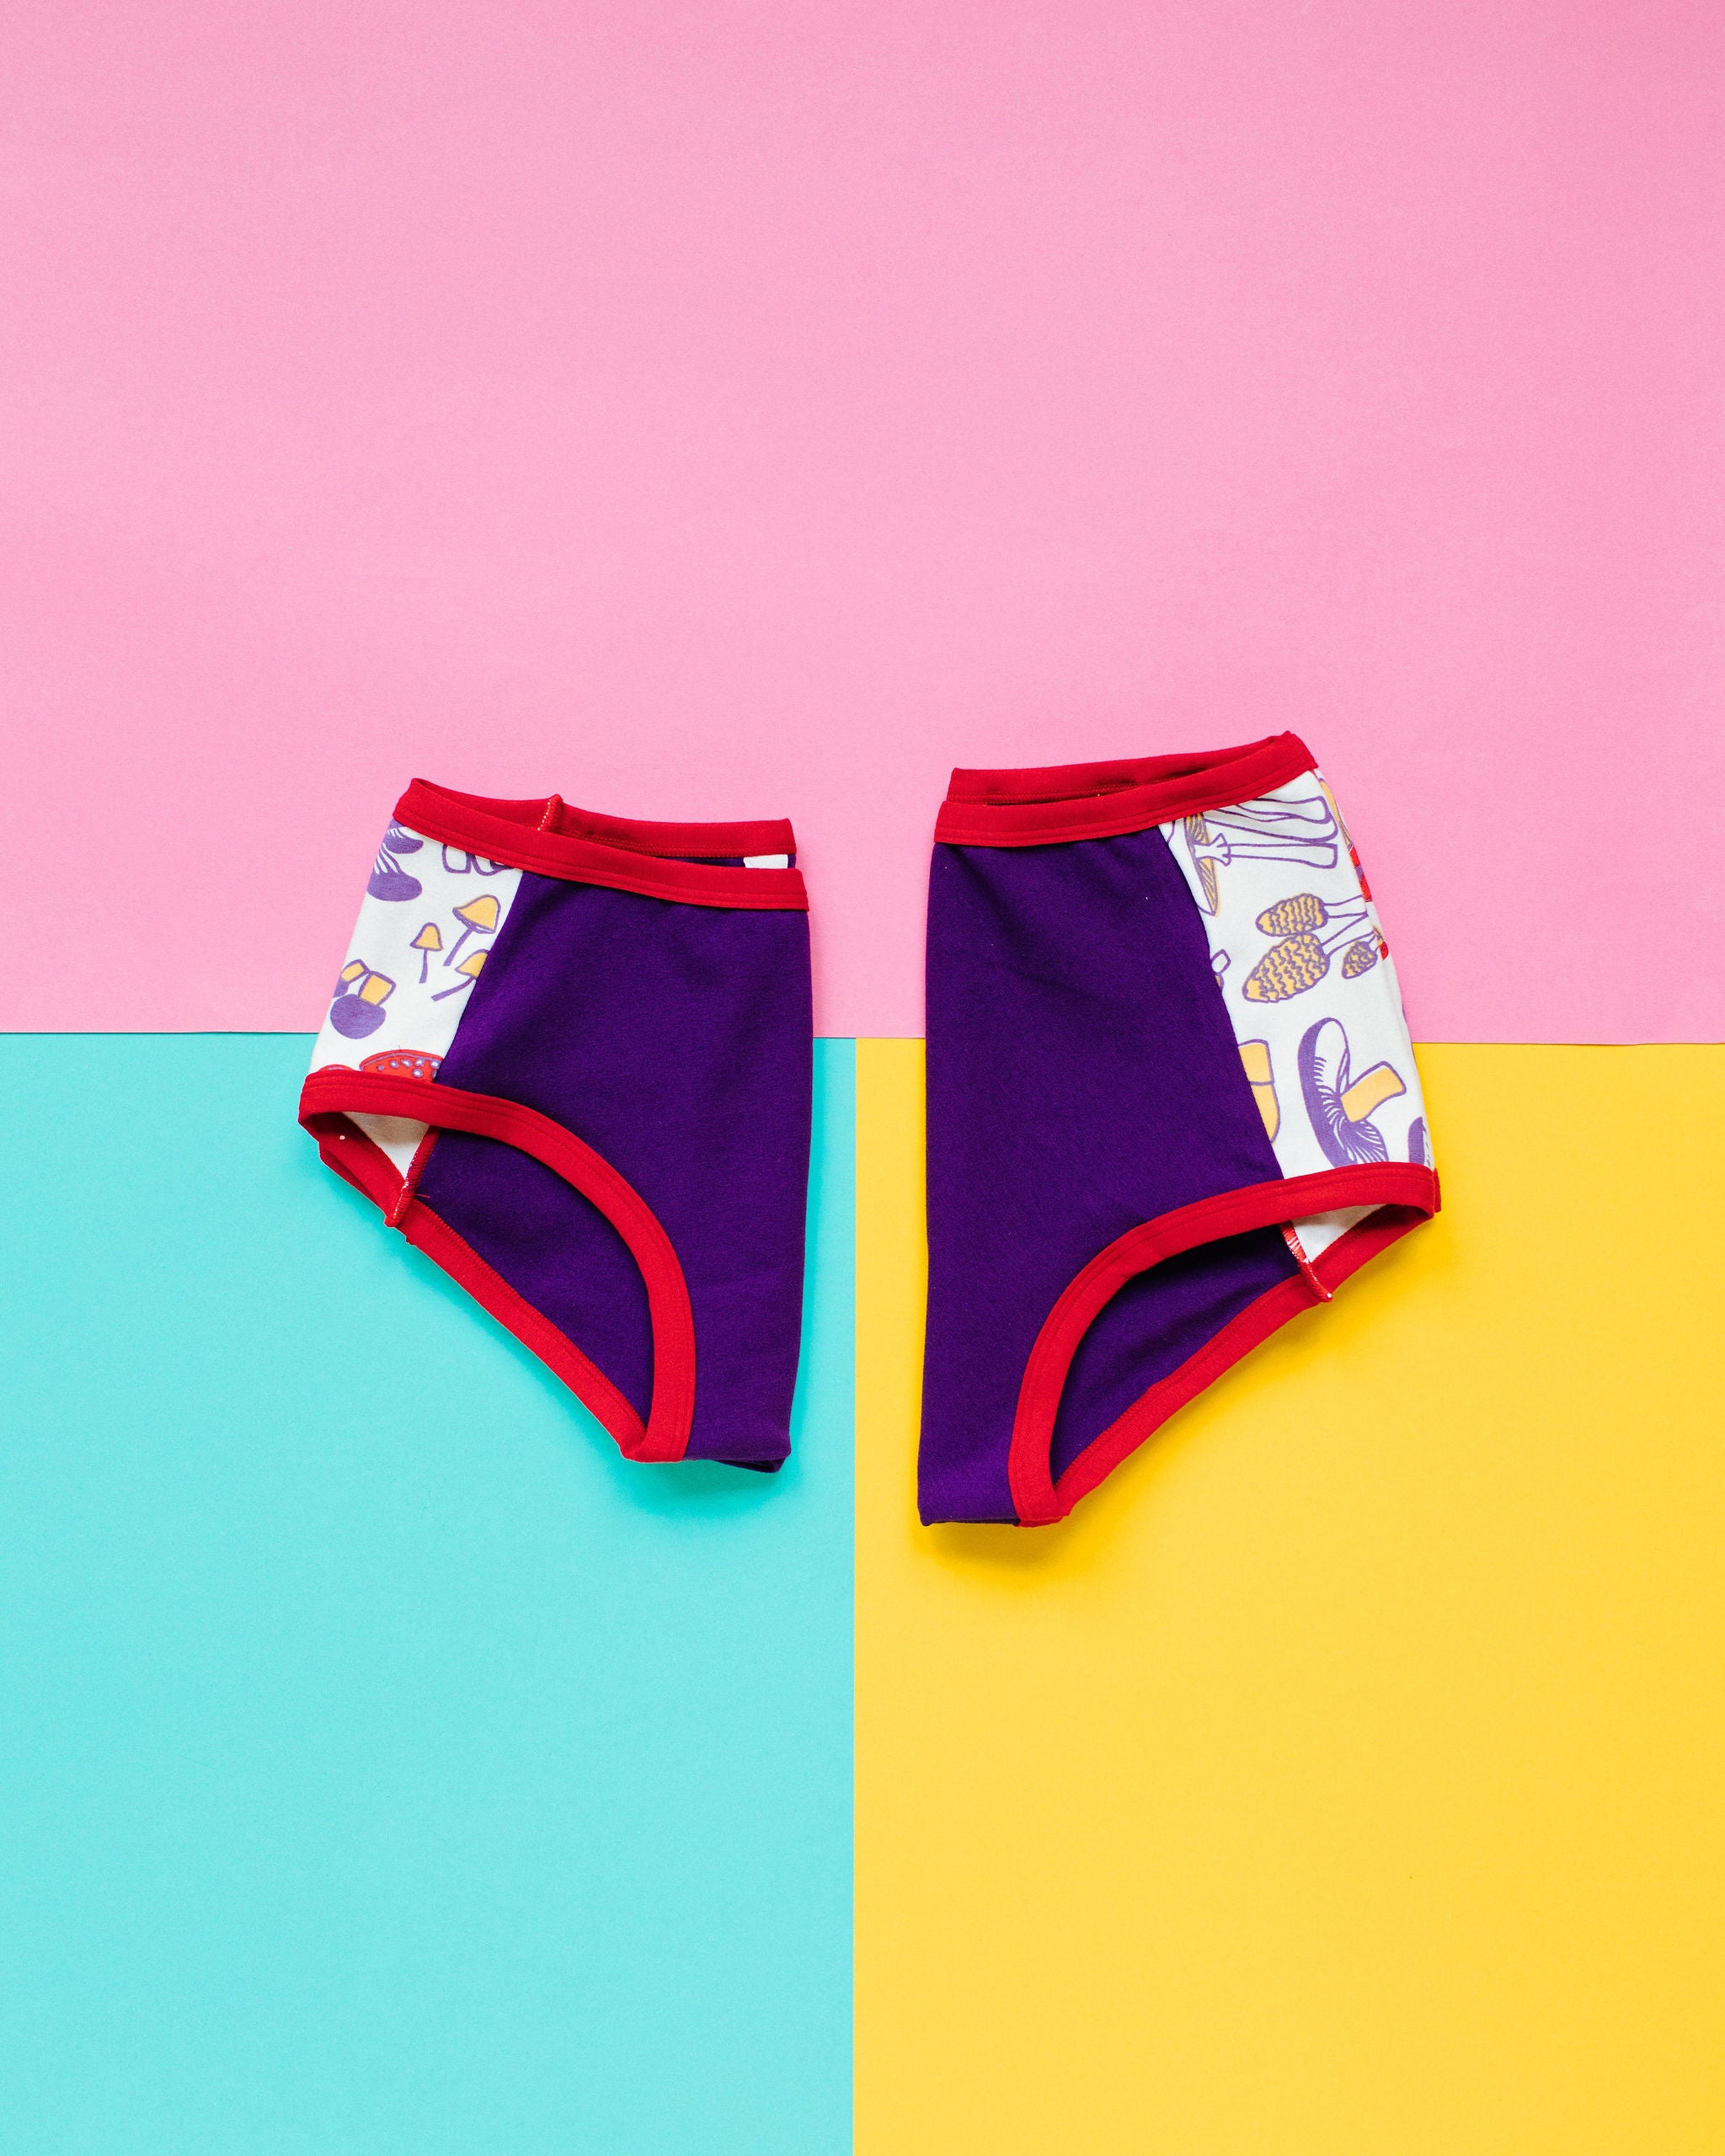 Flat lay of Thunderpants Original and Hipster Panel Pants style underwear in Mushroom Magic - mushroom sides, purple middle, and red binding.